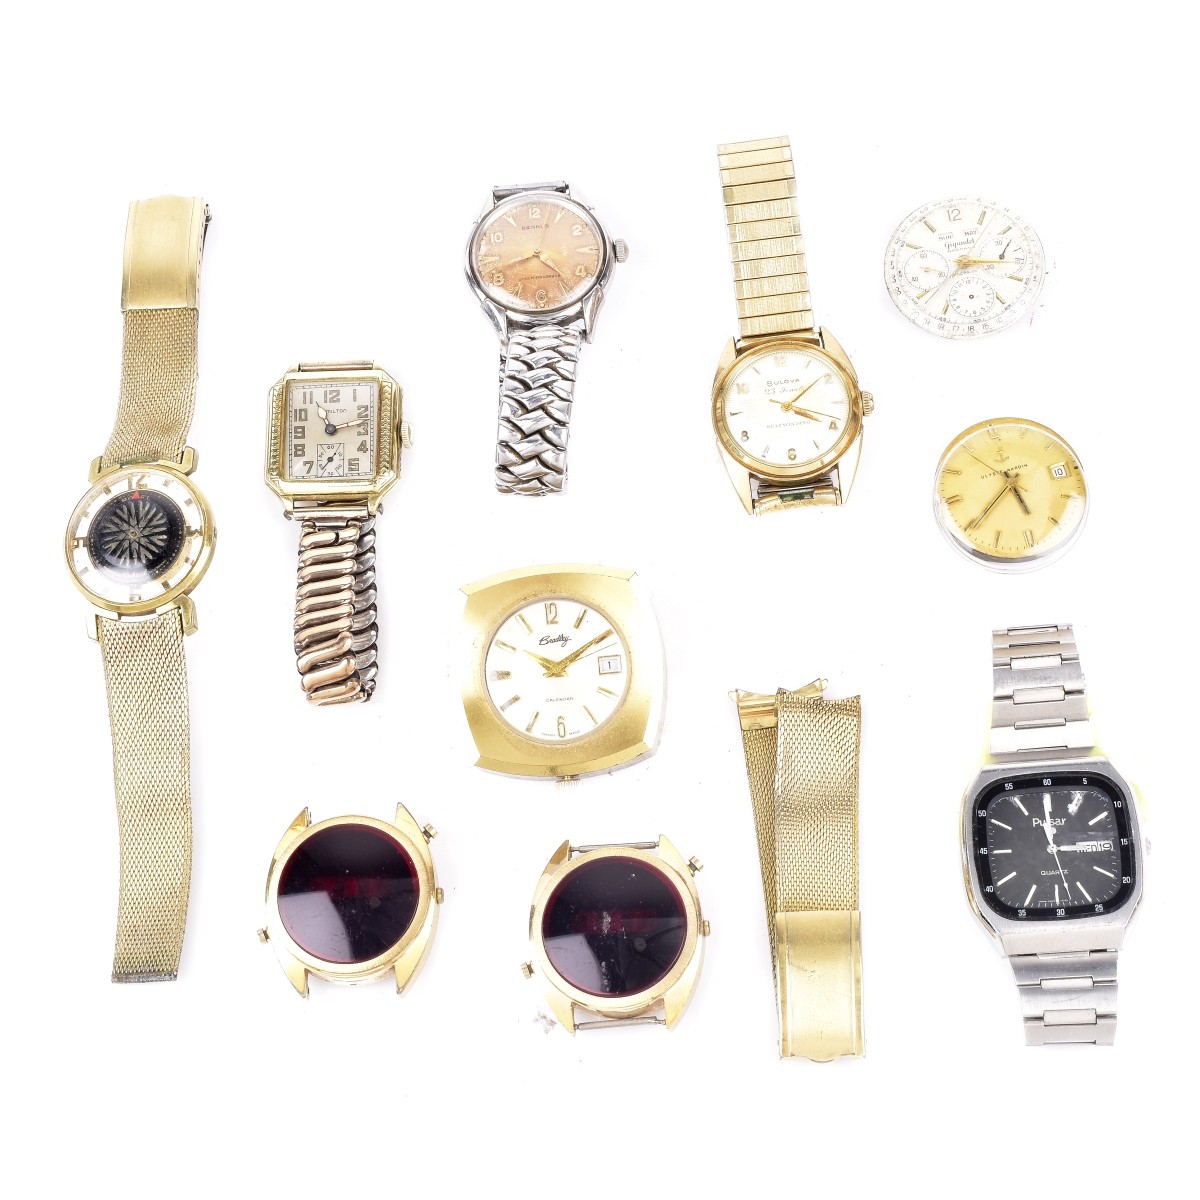 Collection of Ten Vintage Timepieces